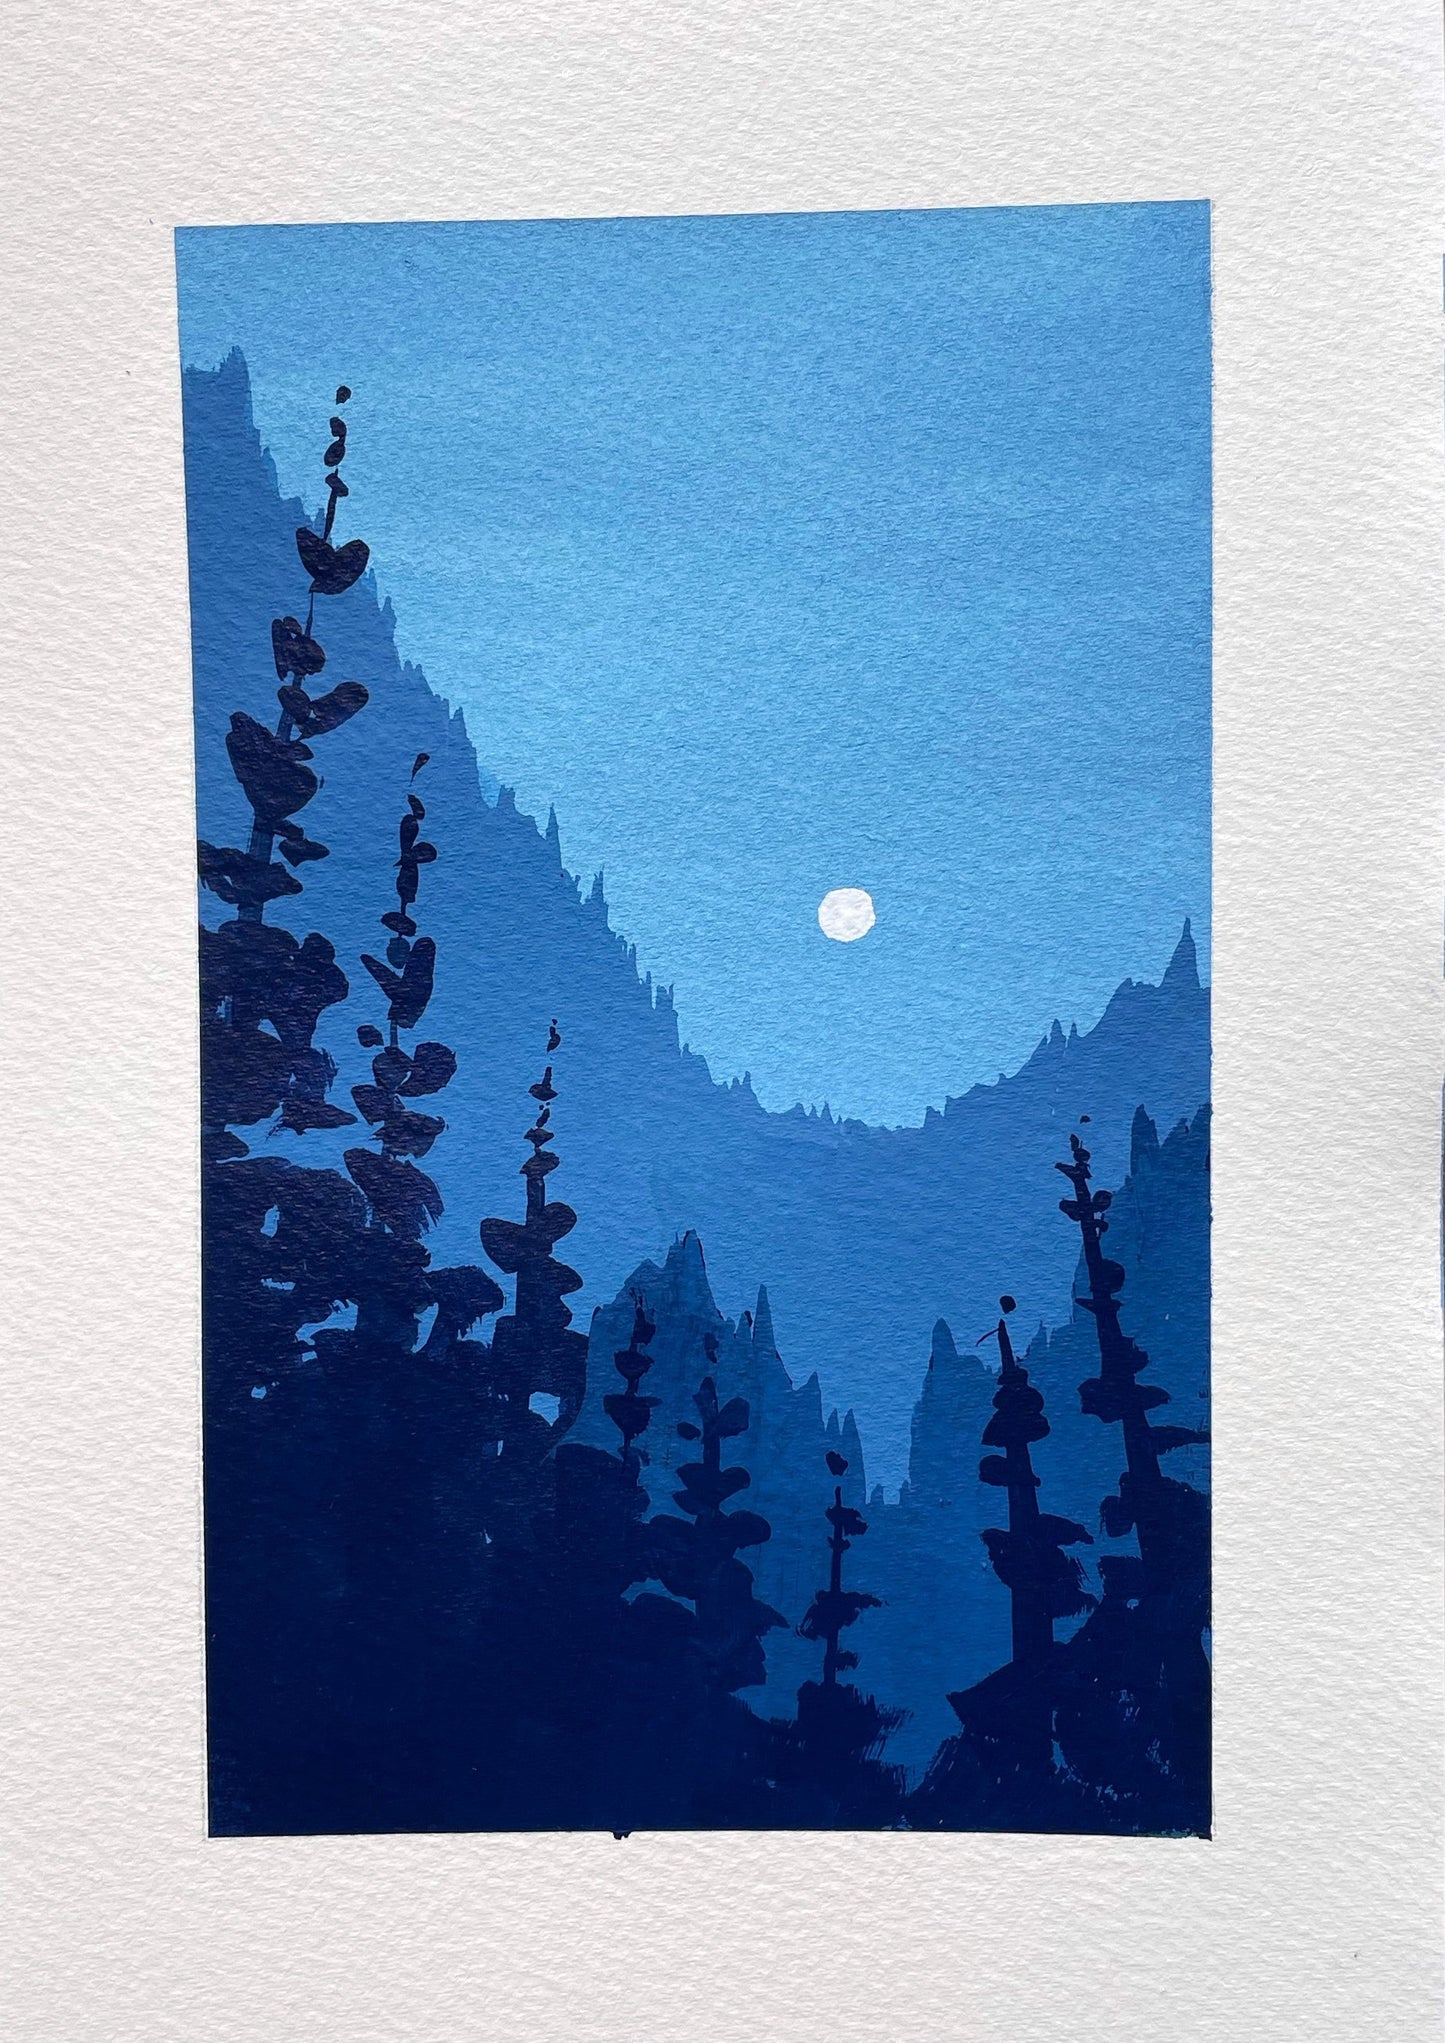 'In the Mountains' Trio of Original Gouache Paintings